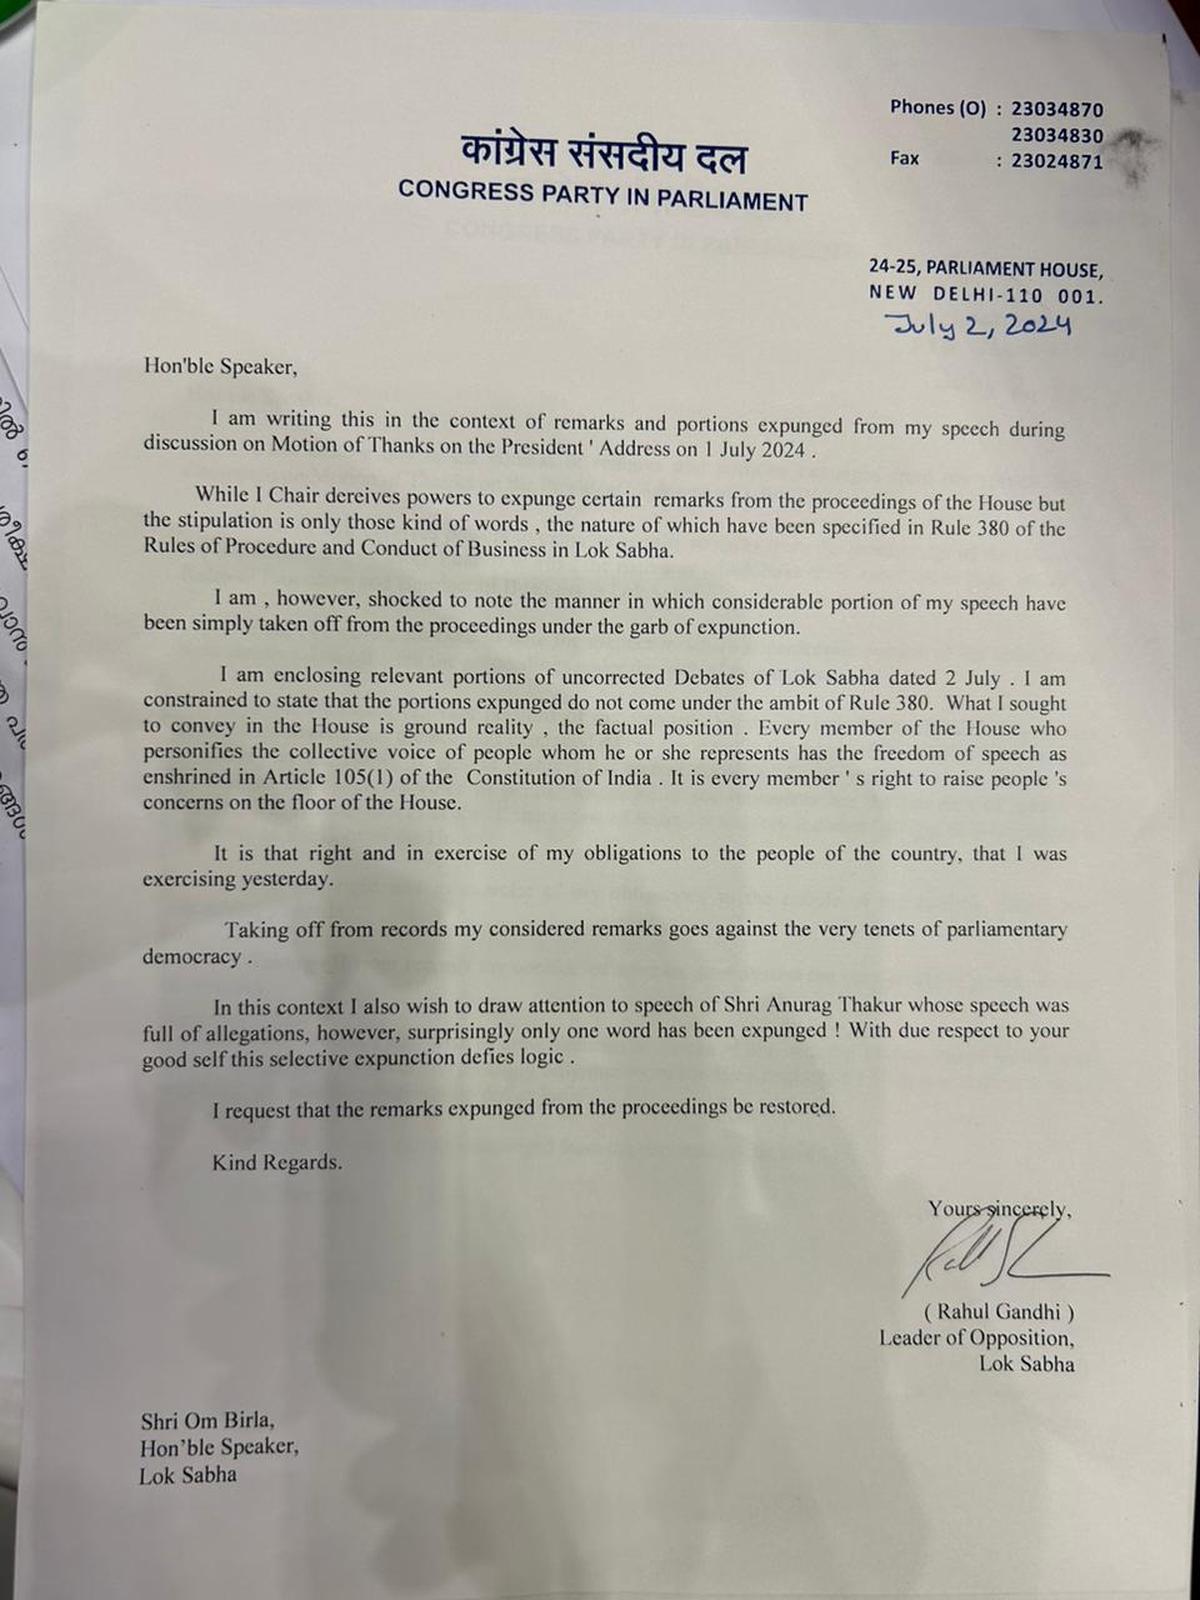 Leader of the Opposition Rahul Gandhi writes to Lok Sabha Speaker Om Birla in the context of portions expunged from his Lok Sabha speech on July 1, 2024.